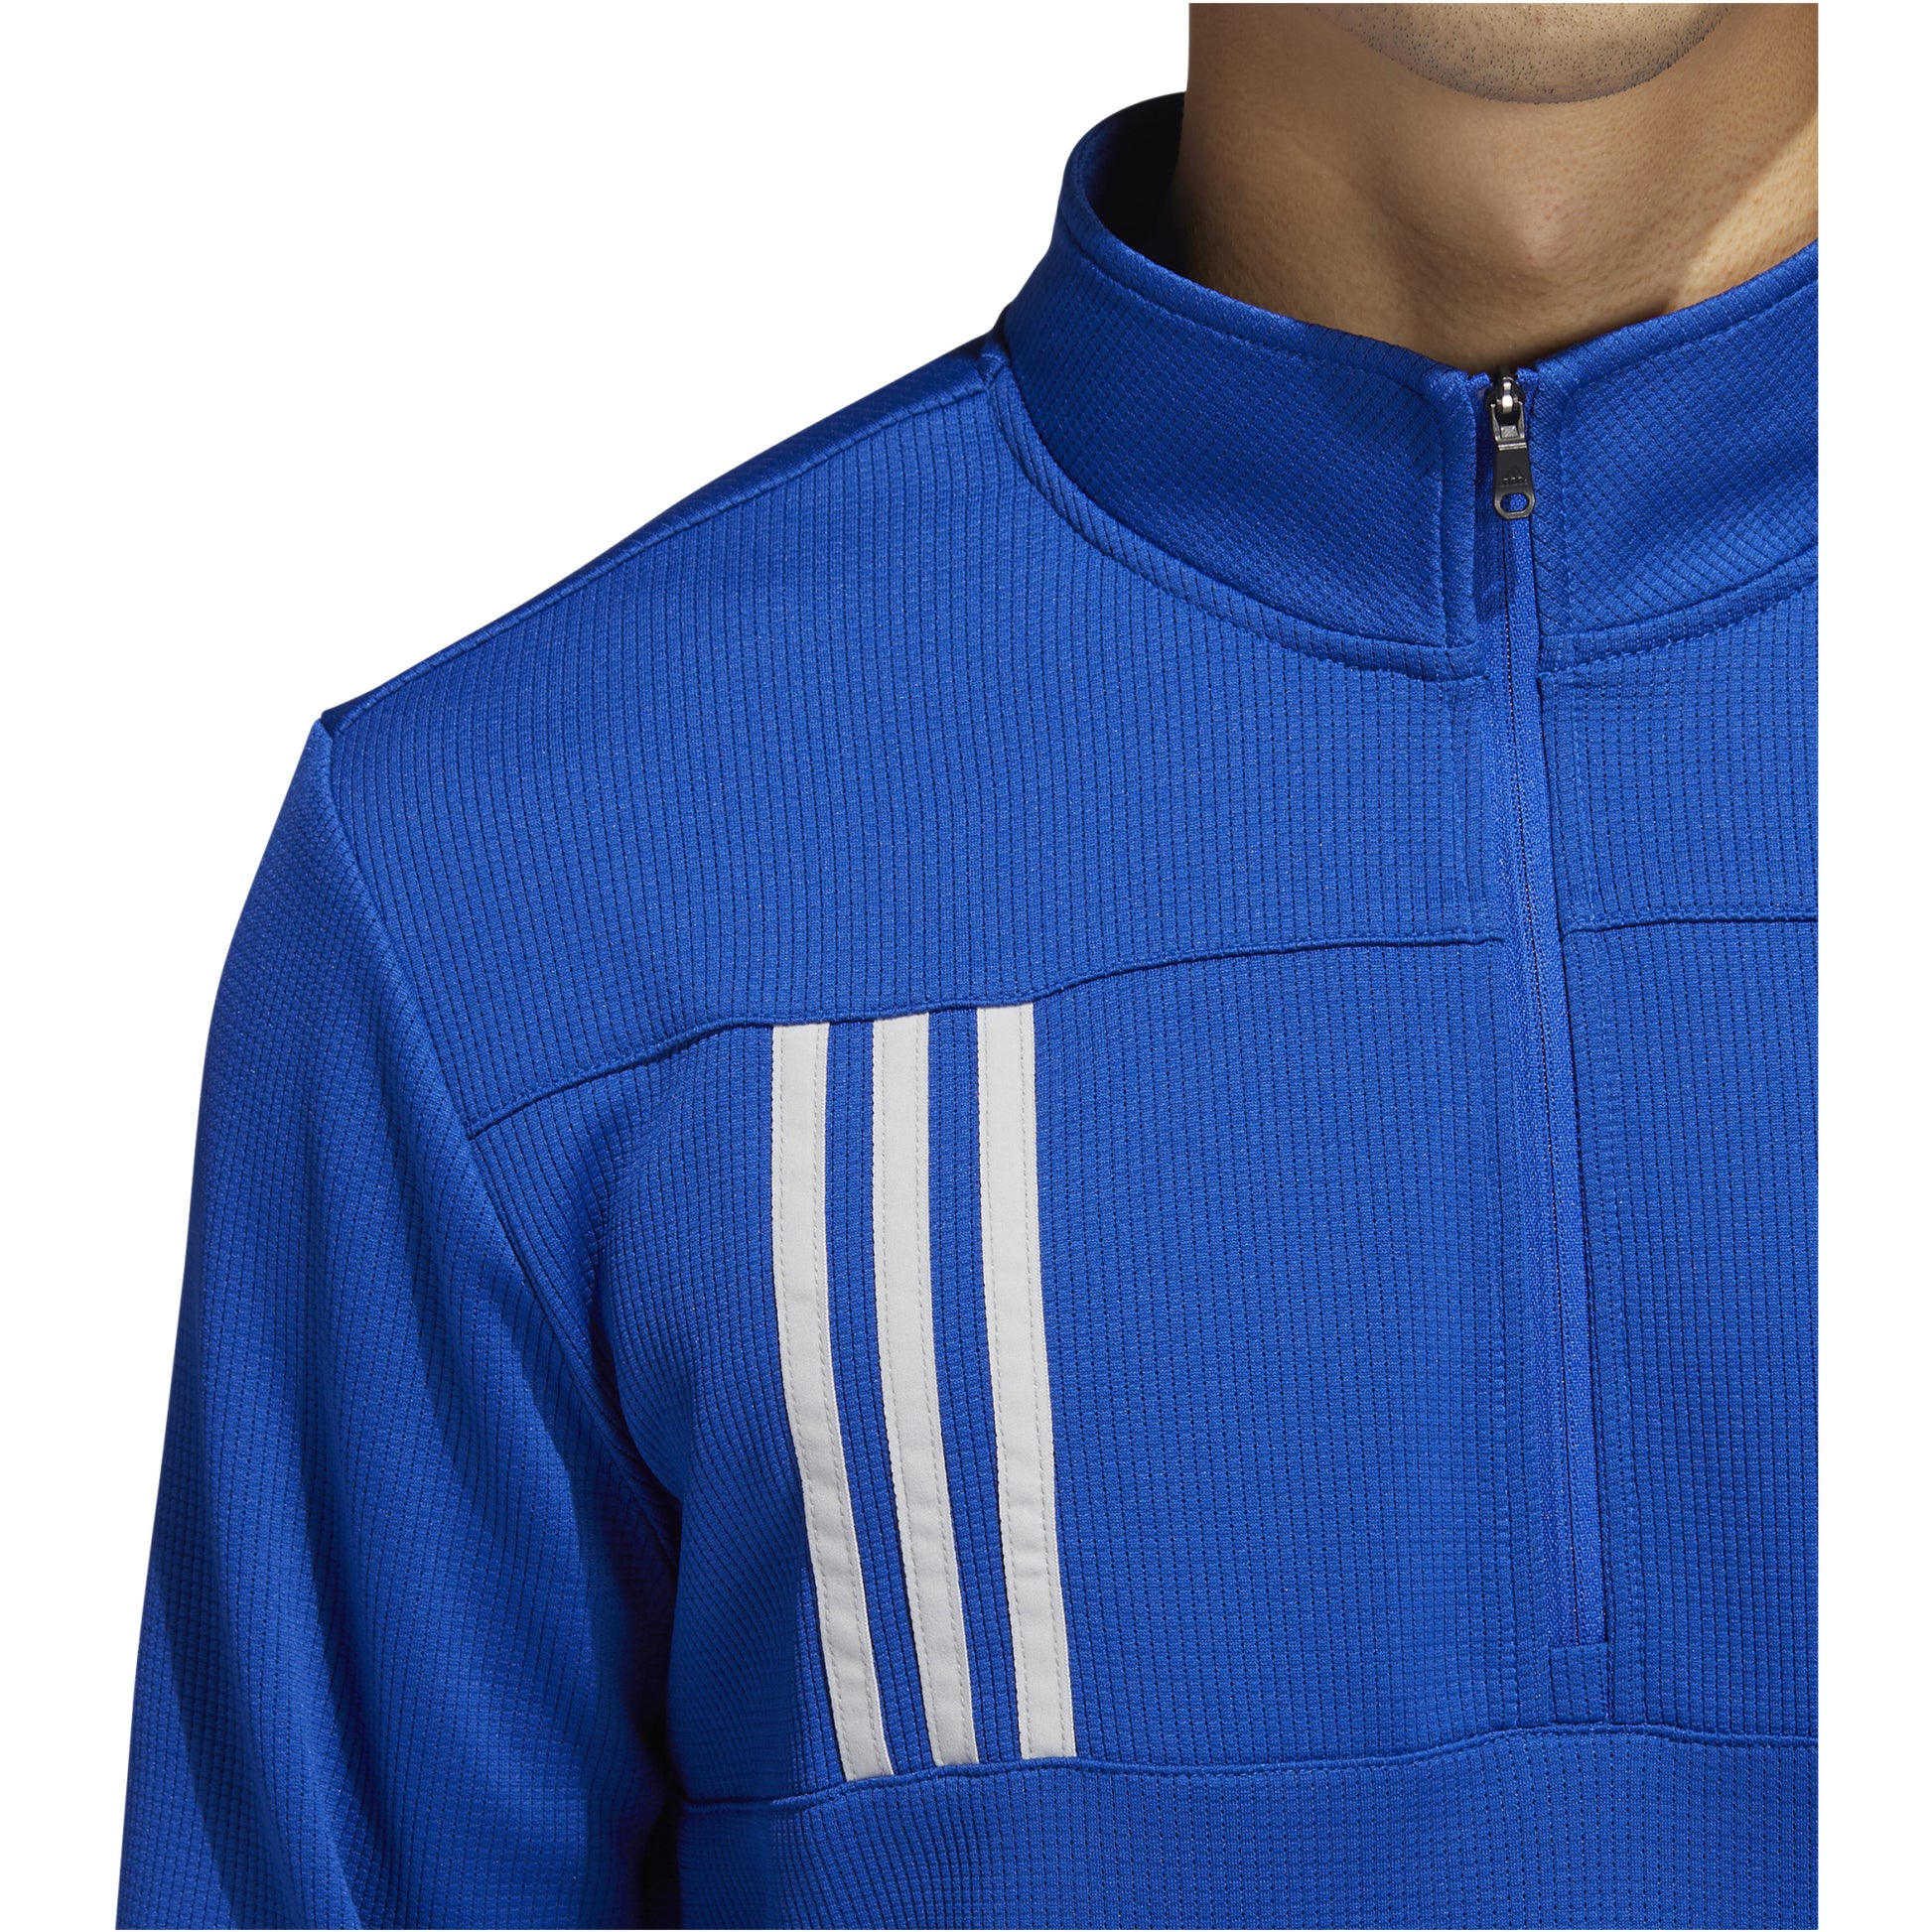 Team – Zip 1/4 Textured Golf 3-Stripes Pullover Products